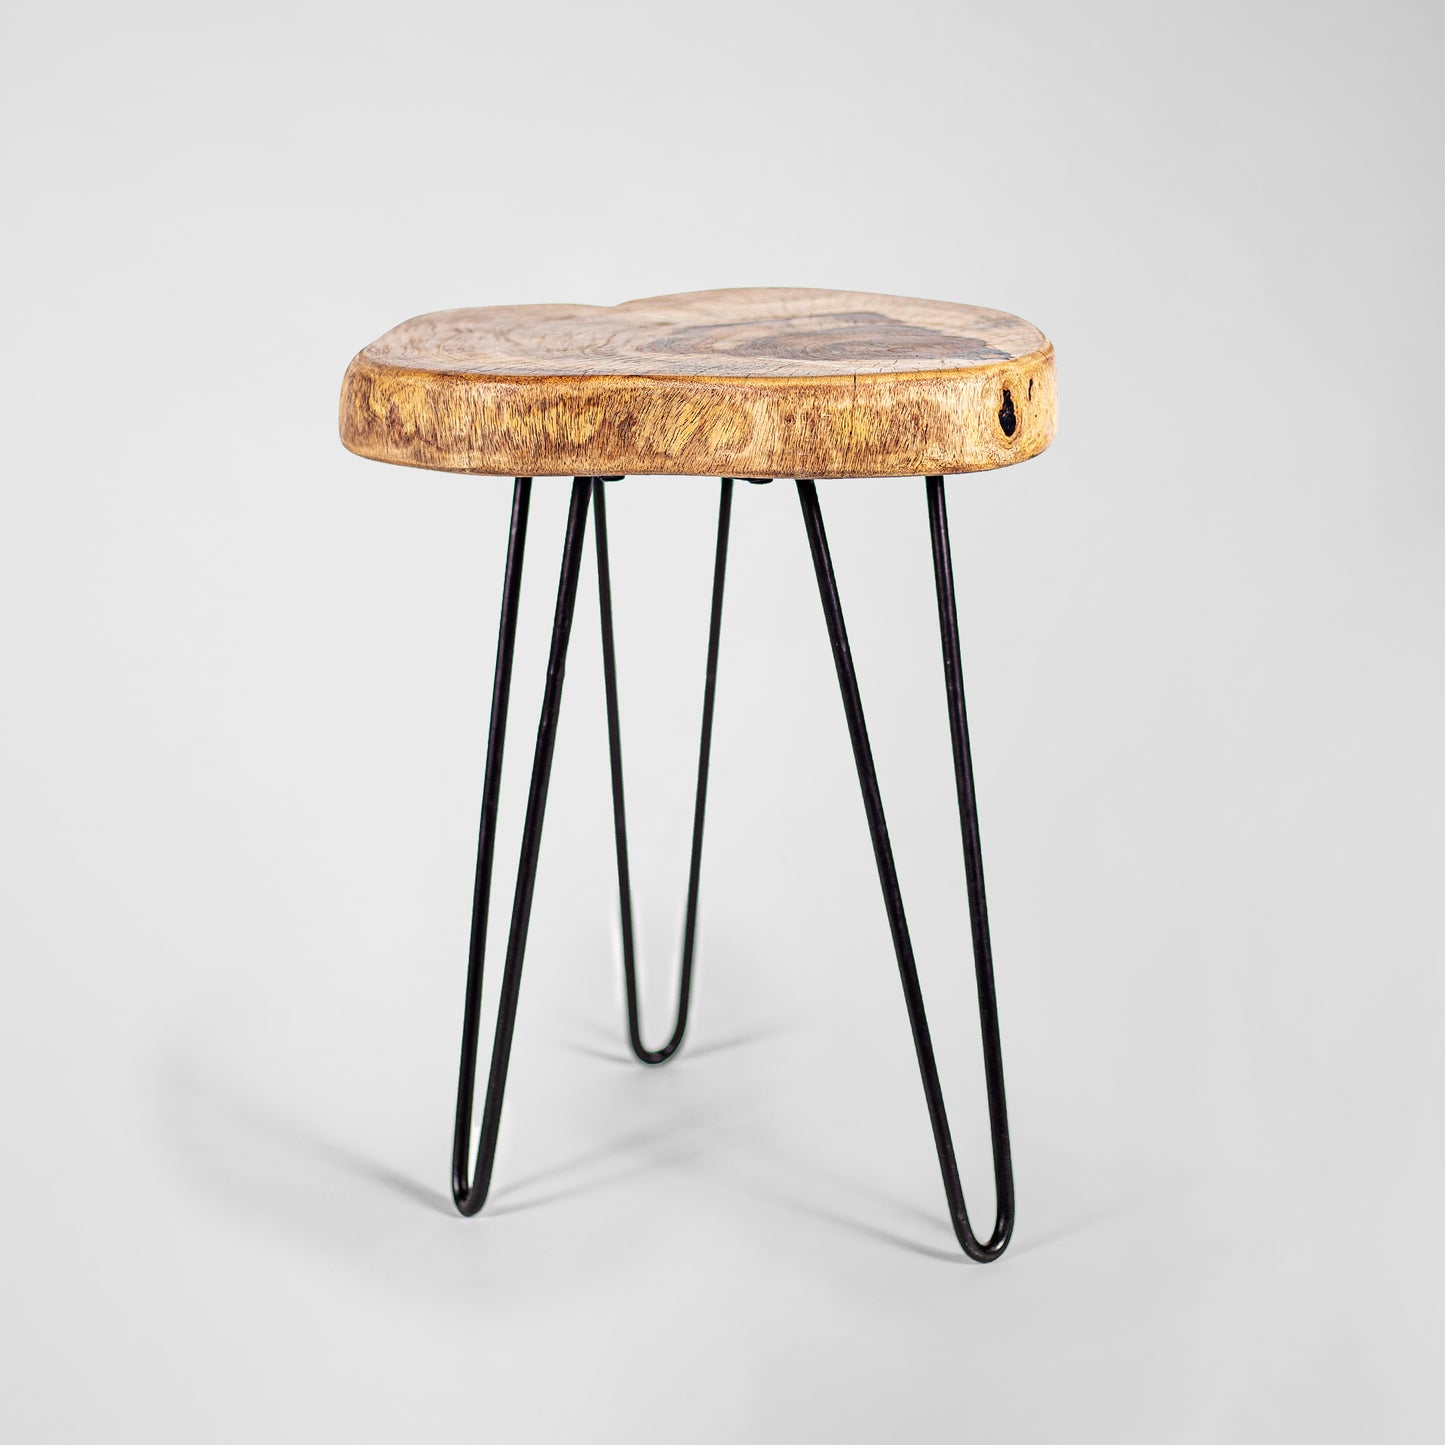 Johnny Slice – rustic industrial design HairPin stool made of wood and metal